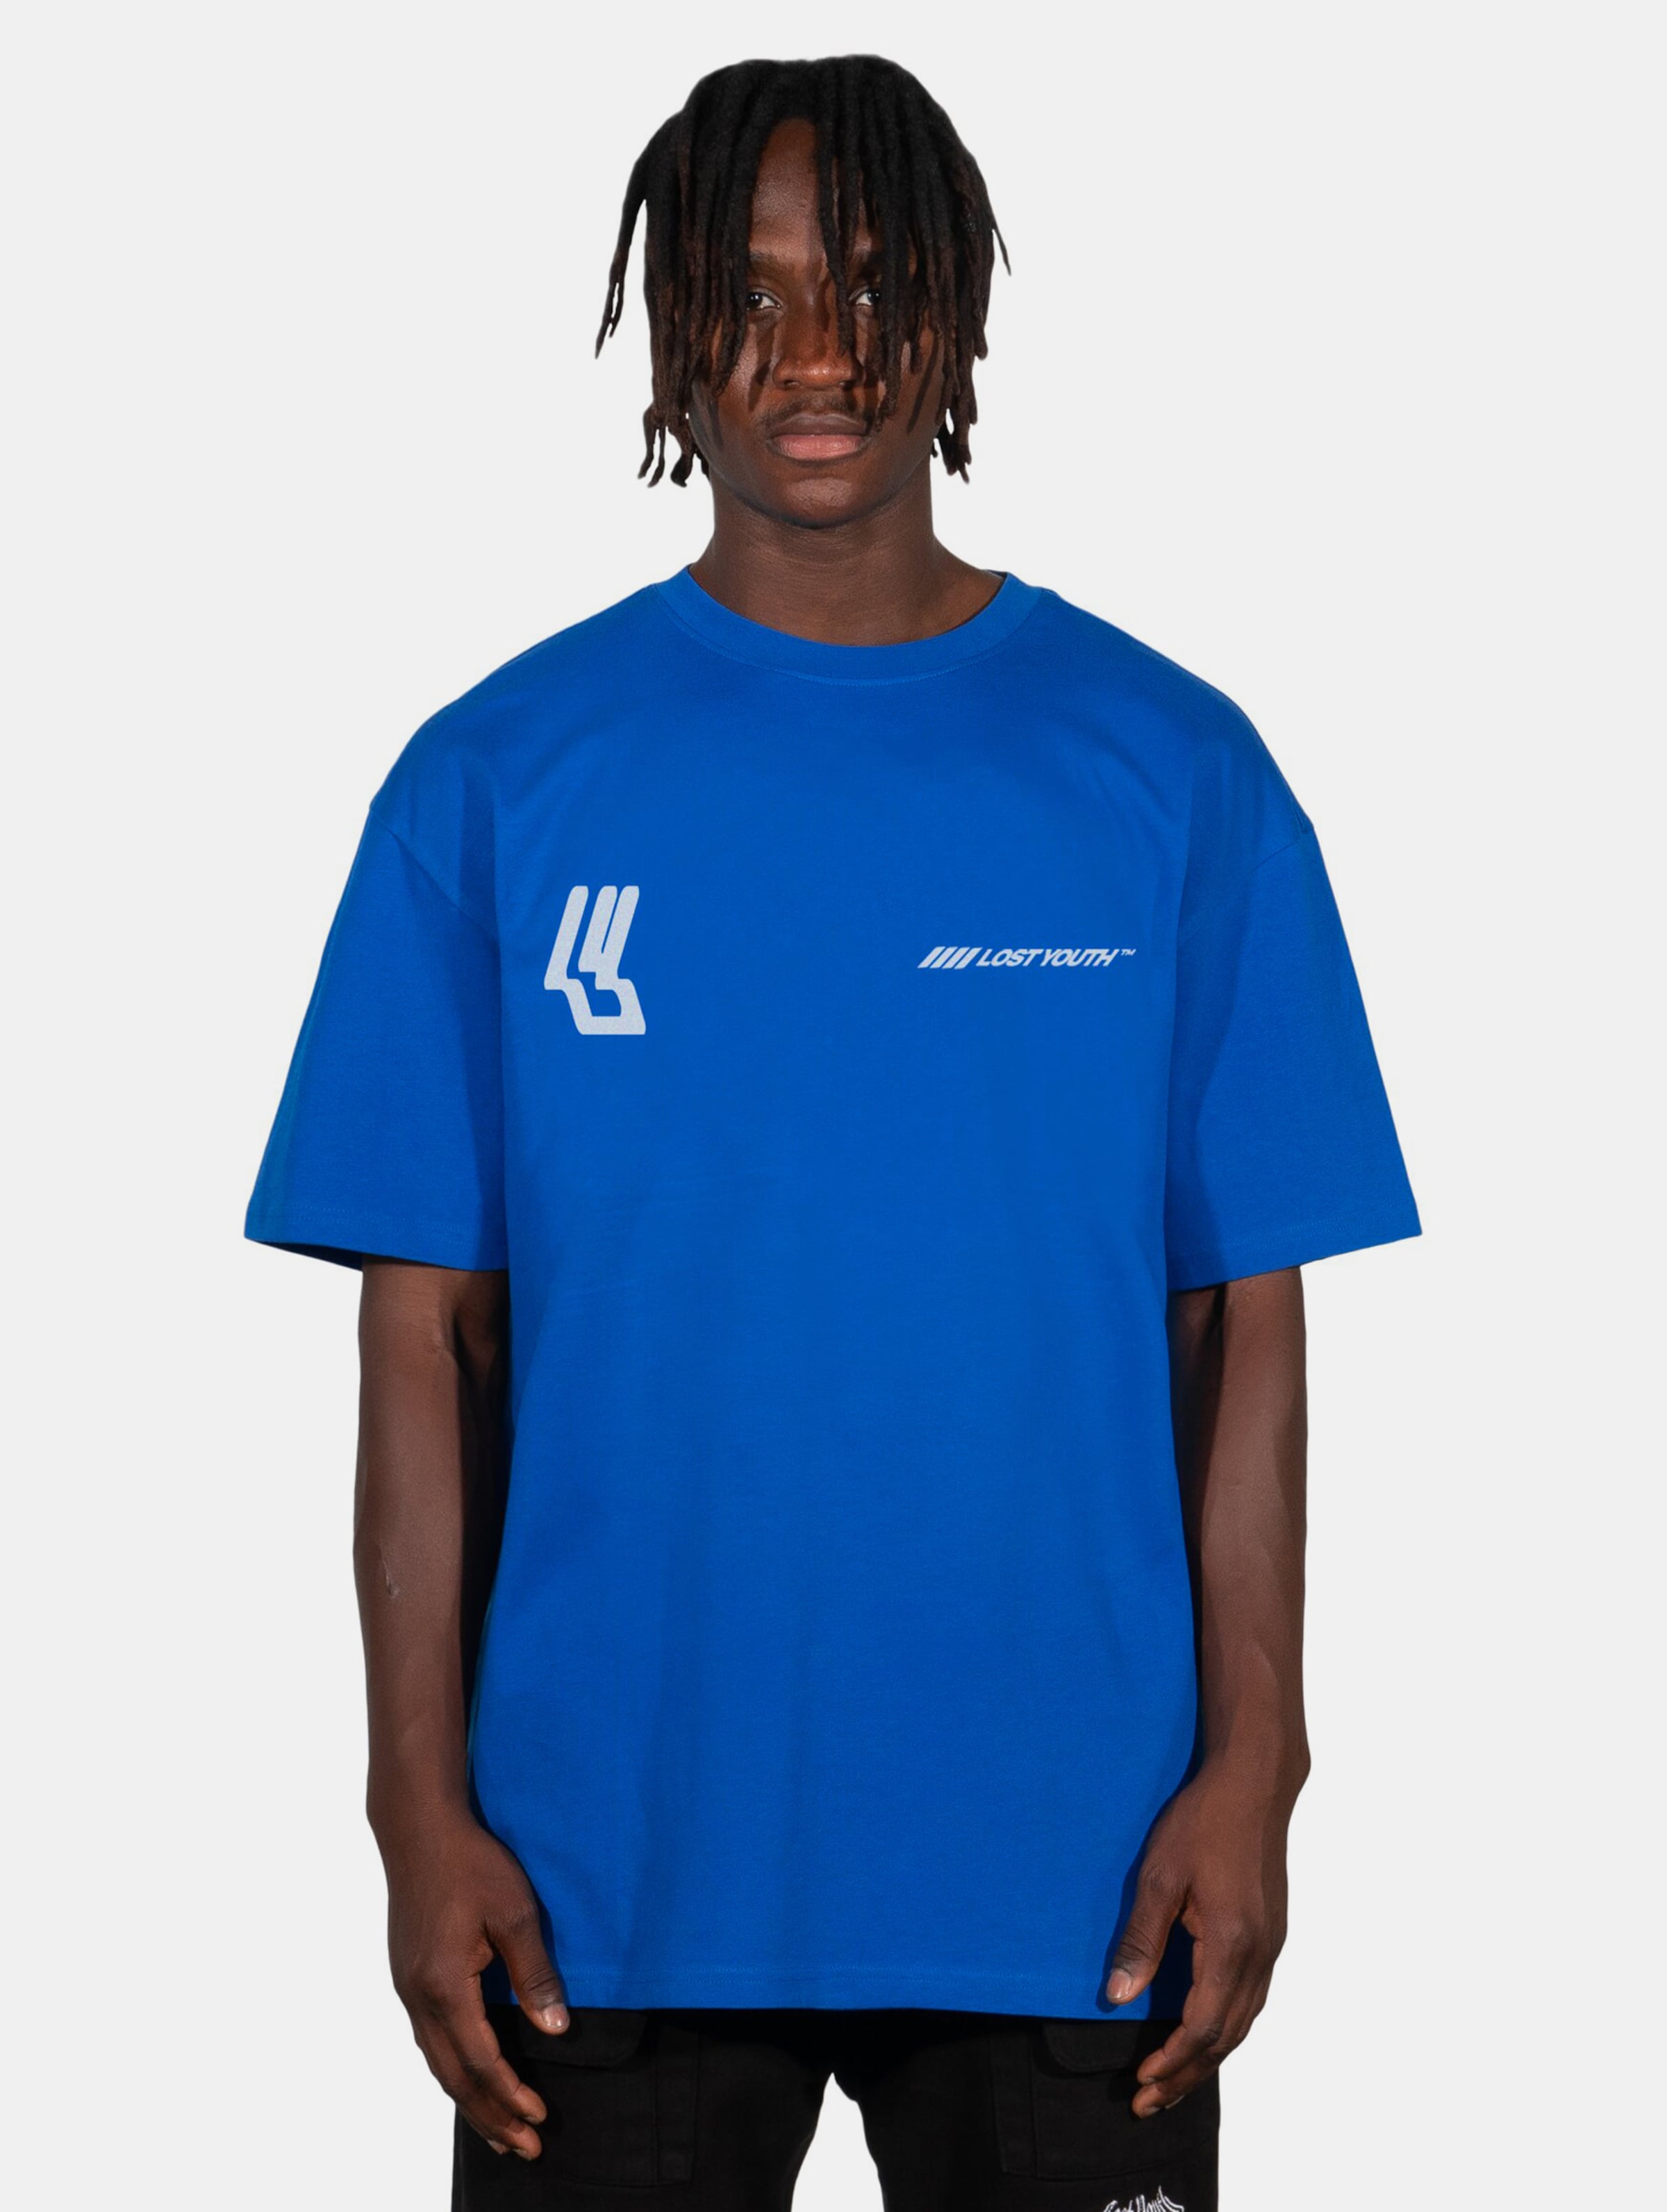 Lost Youth LY TEE- ICON V.2 Männer,Unisex op kleur blauw, Maat XL